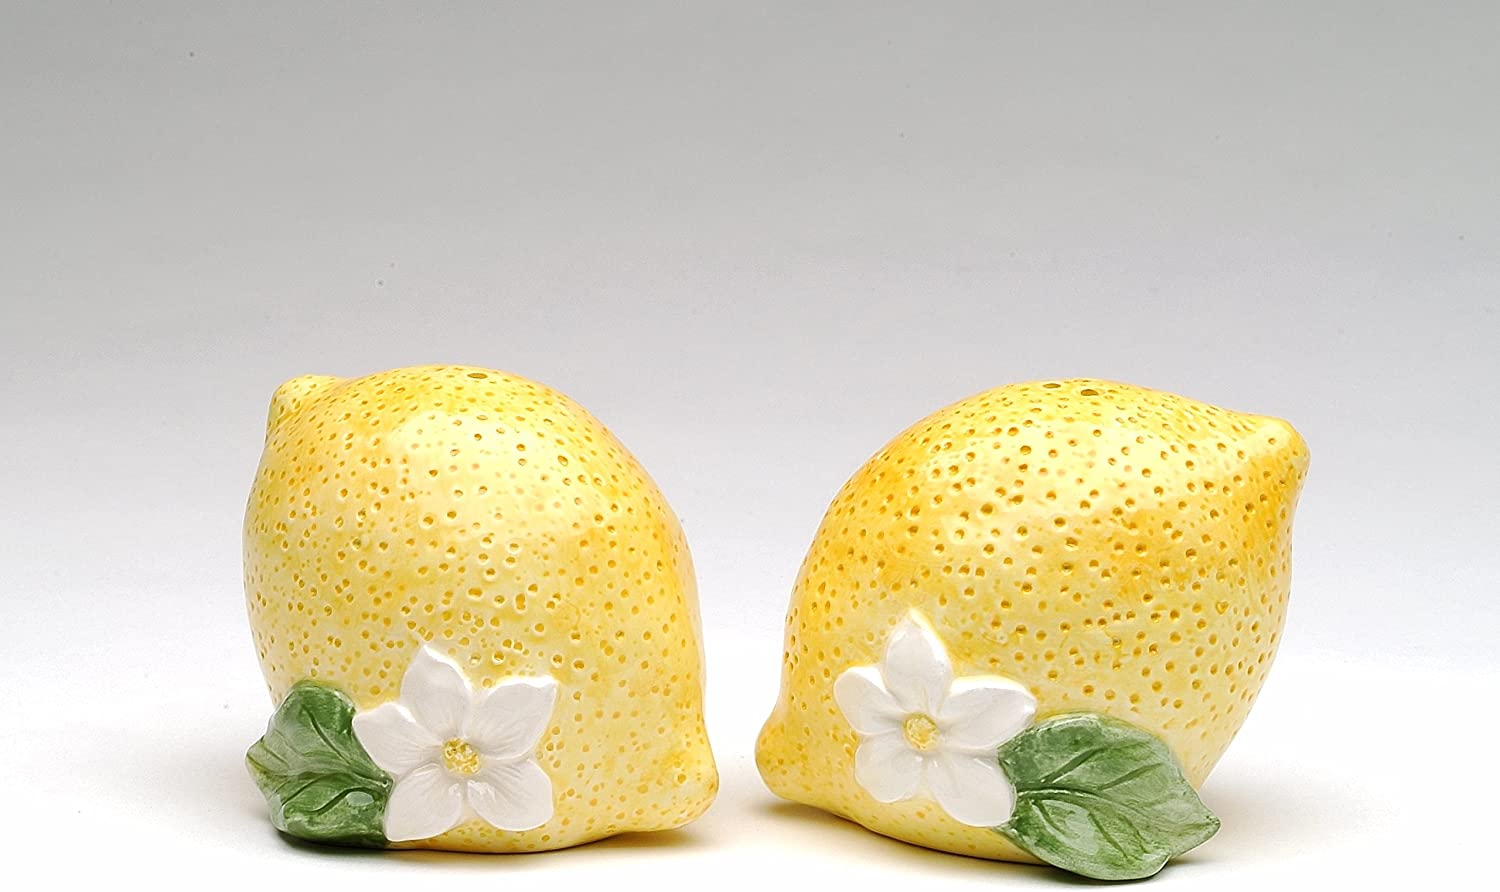 StealStreet SS-CG-40314, 3.5 Inch Two Yellow Lemons with White Flowers Salt and Pepper Shakers